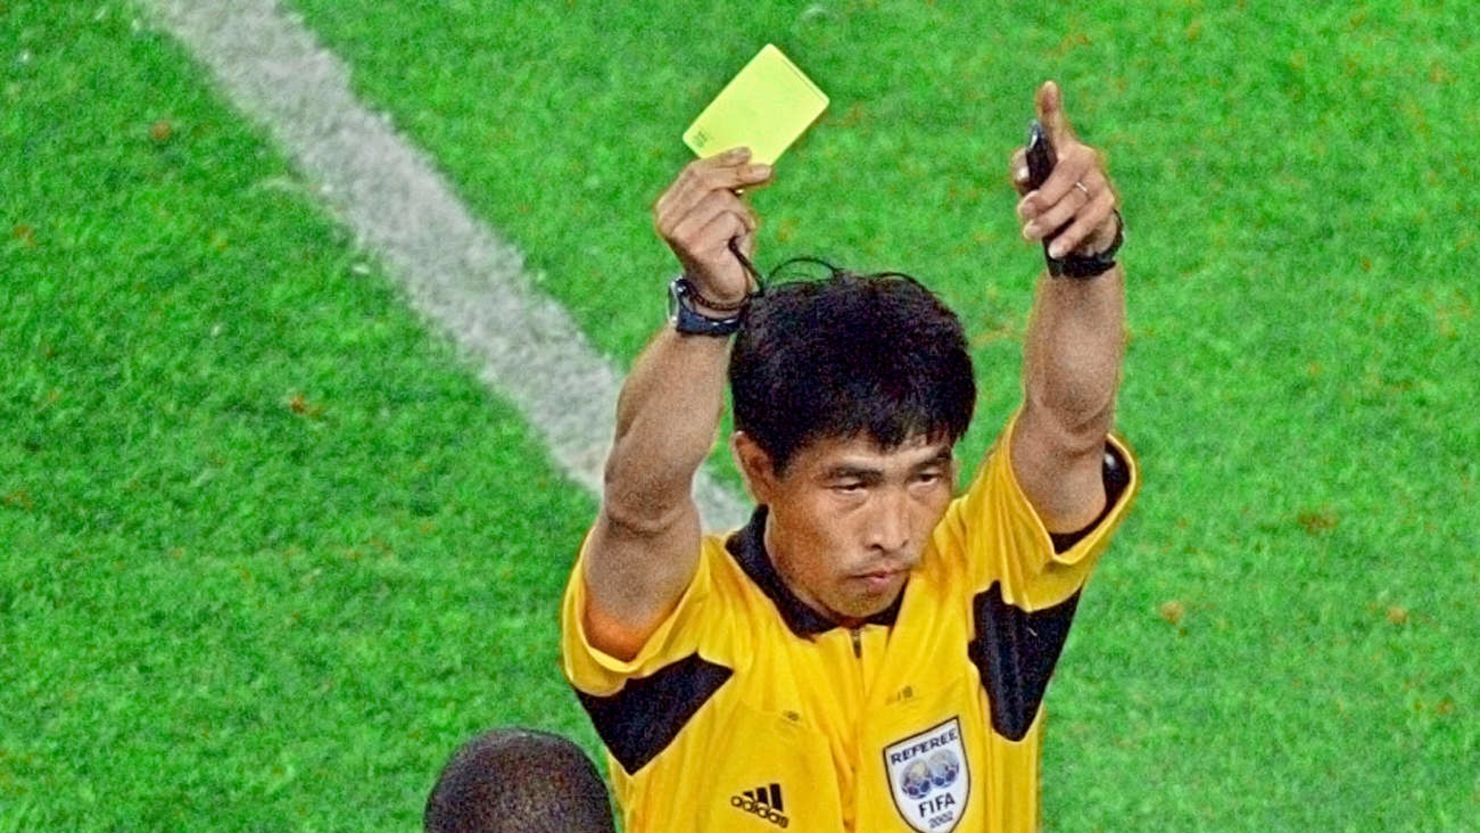 One of China's most famous soccer referees, Lu Jun, has been sent to jail for fixing matches